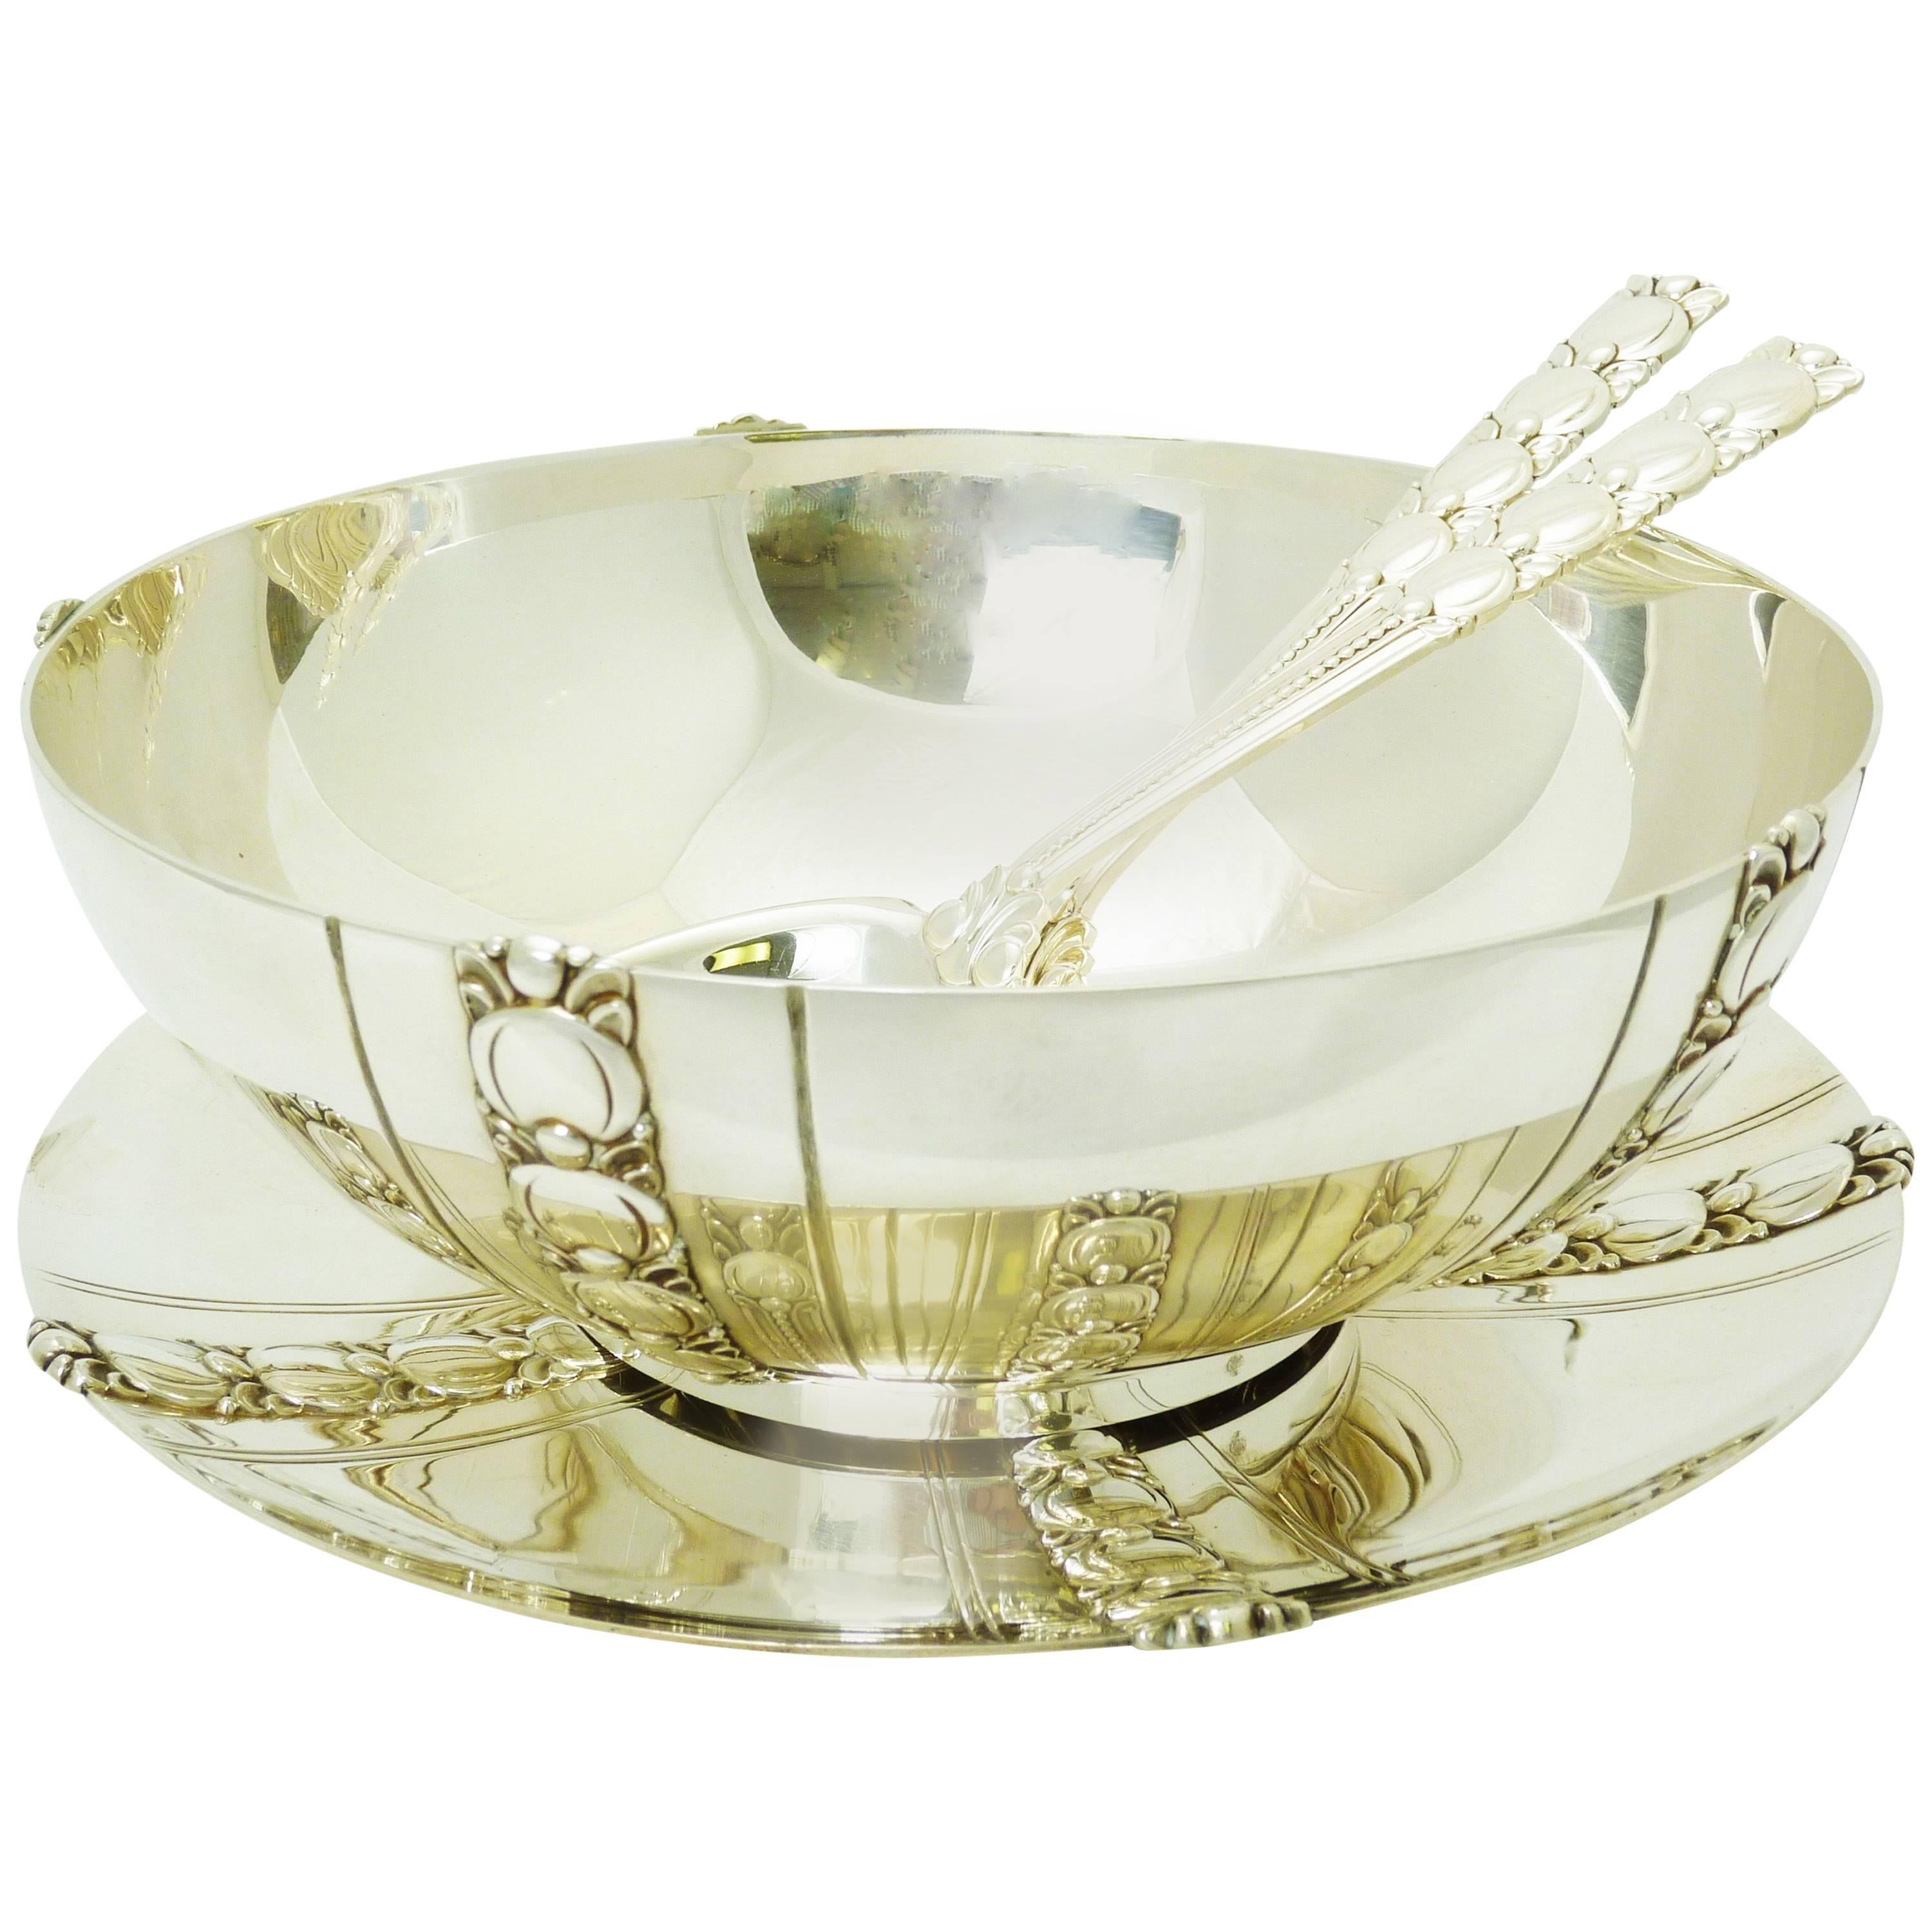 Tiffany & Co. Sterling Silver Bowl, Underplate and Salad Serving Set For Sale